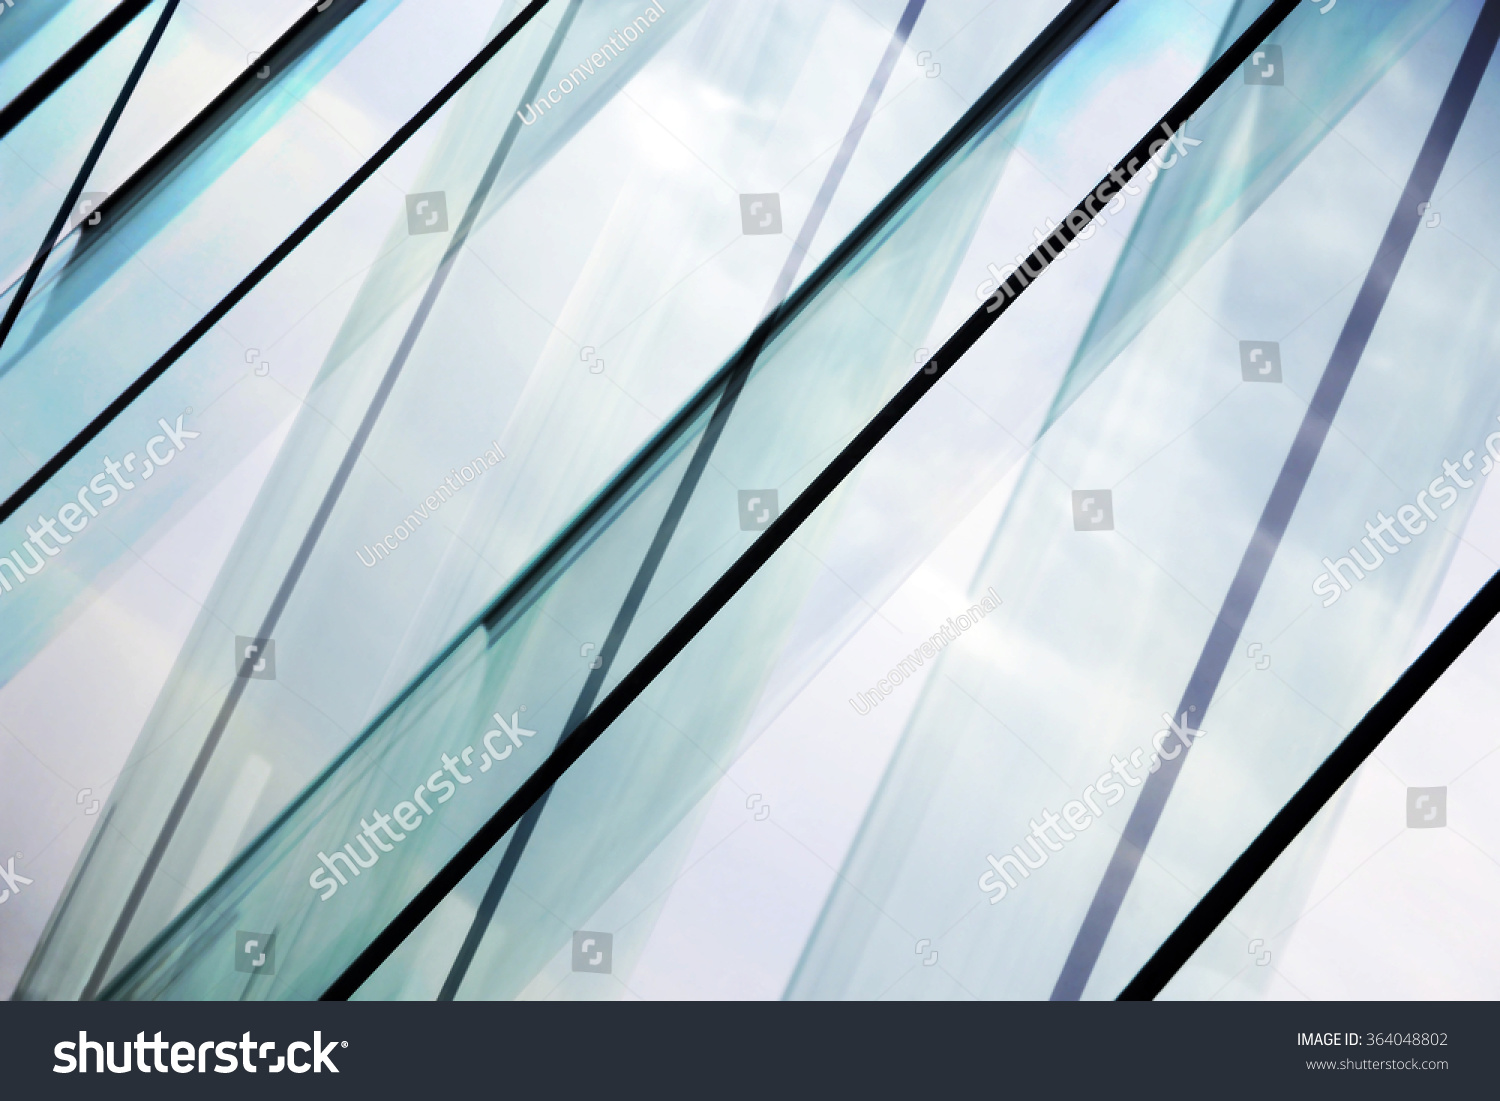 Glass architecture. Tilt double exposure photo of modern office building facade. Sample of dynamic business cityscape. Abstract high-technology composition with all-over glazing. #364048802